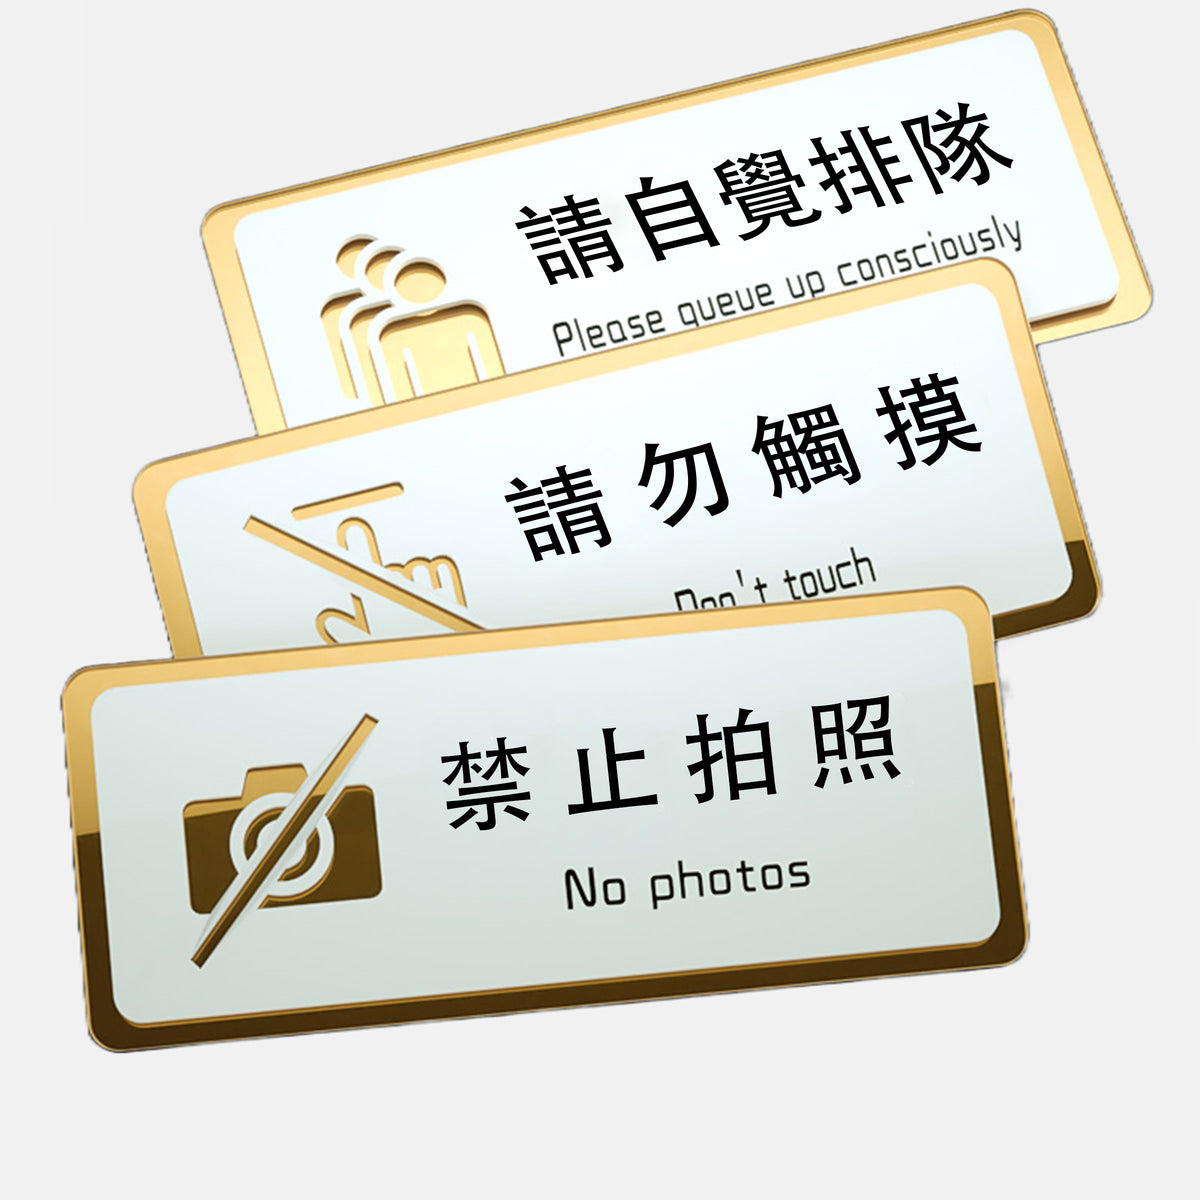 Exhibition Promotional Signage | 貿易展會宣傳定制標識牌